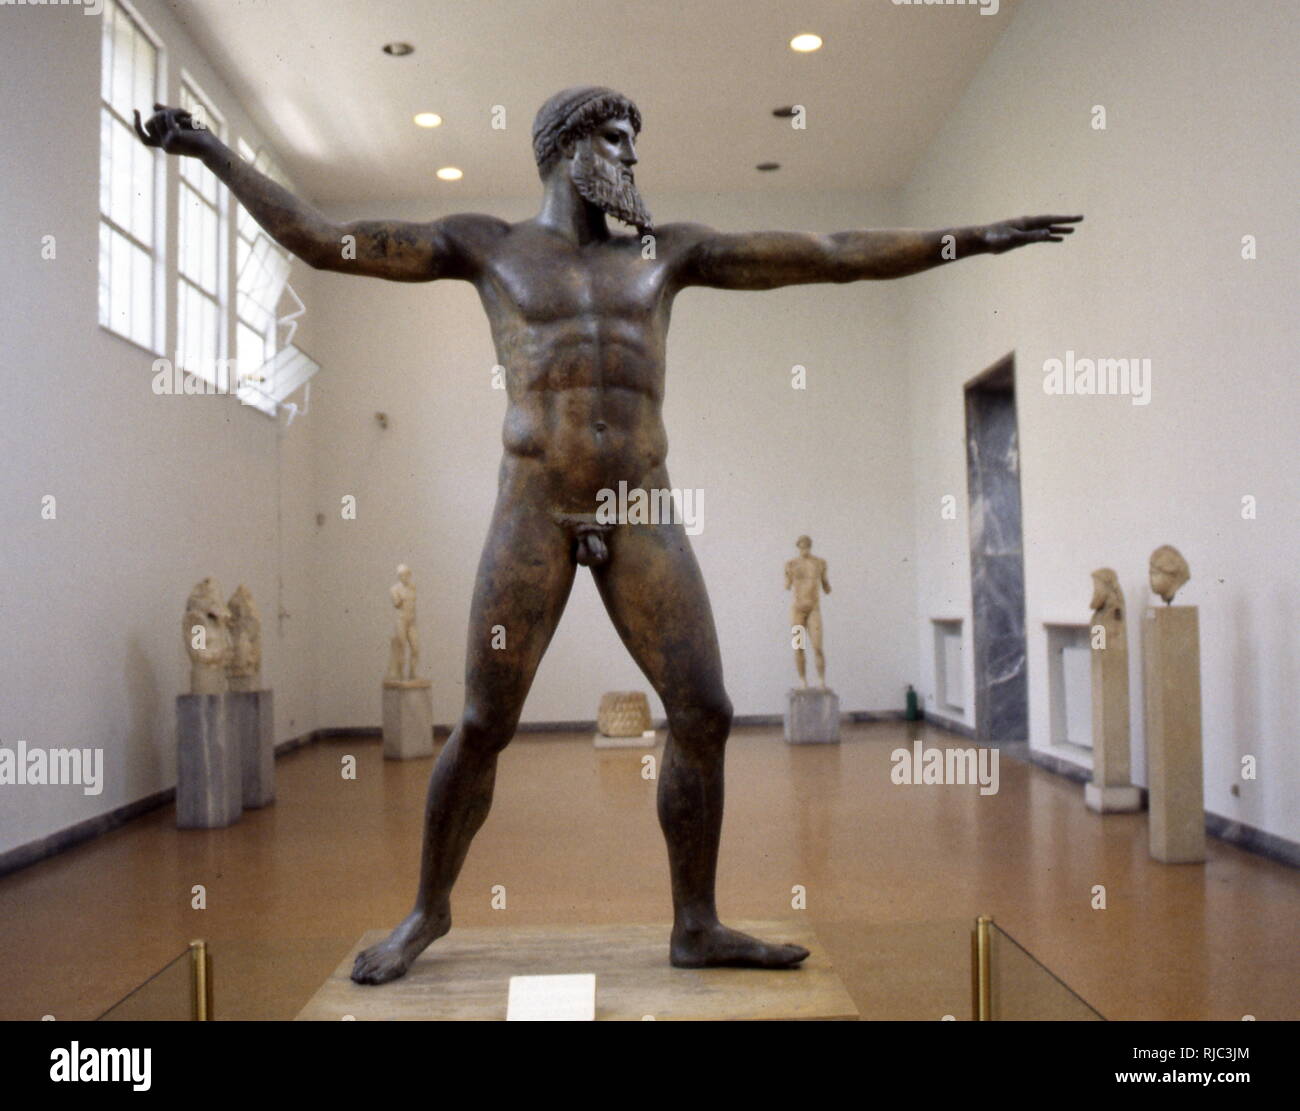 The Artemision Bronze; ancient Greek sculpture, recovered from the sea off Cape Artemision, Greece. It represents either Zeus or Poseidon, ca. 460 BC. The sculpture was first discovered in 1926, at the site of a shipwreck that occurred no earlier than the middle of the second century B.C. Stock Photo